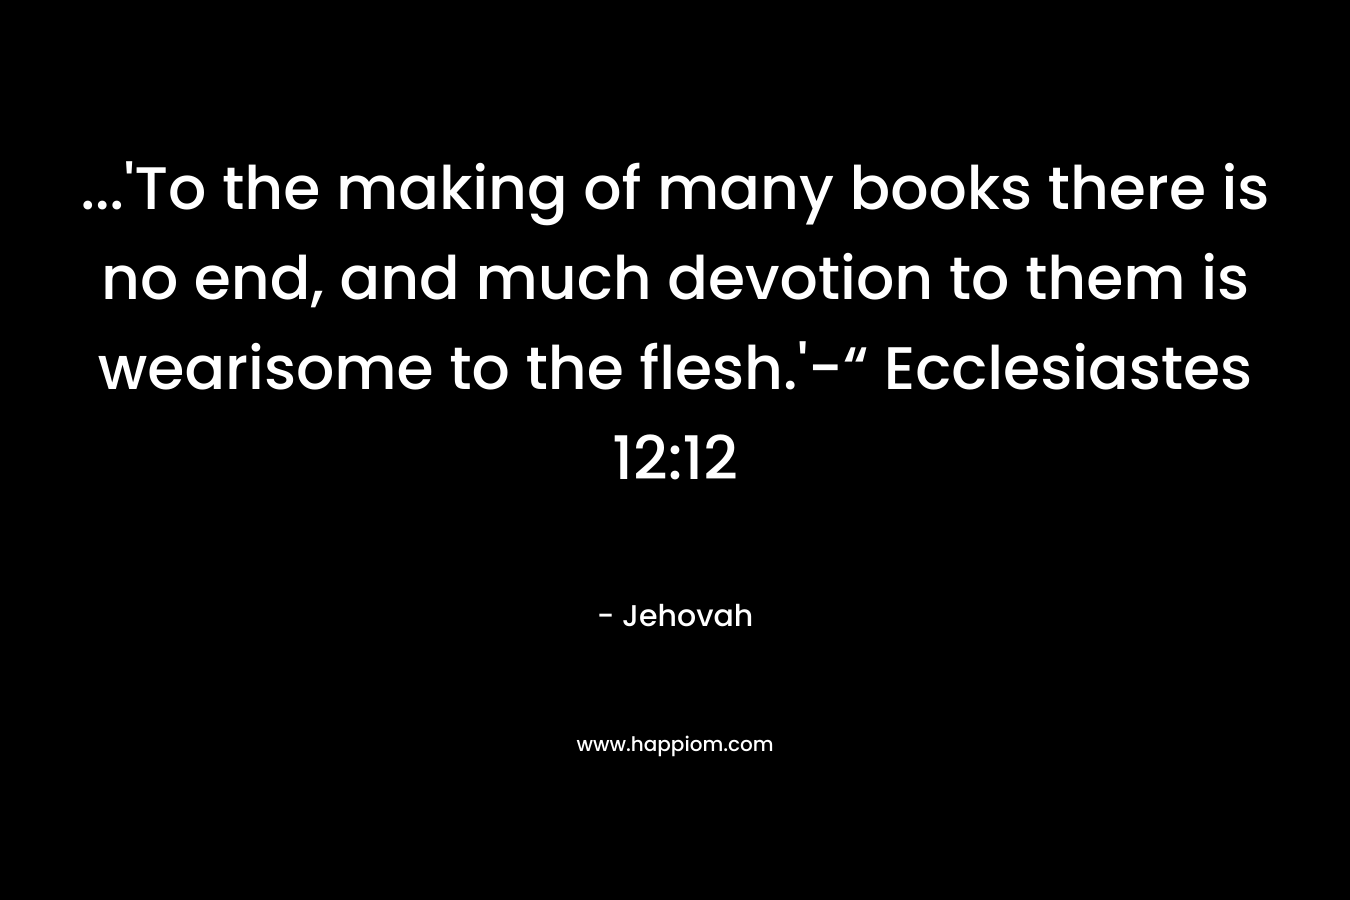 ...'To the making of many books there is no end, and much devotion to them is wearisome to the flesh.'-“ Ecclesiastes 12:12